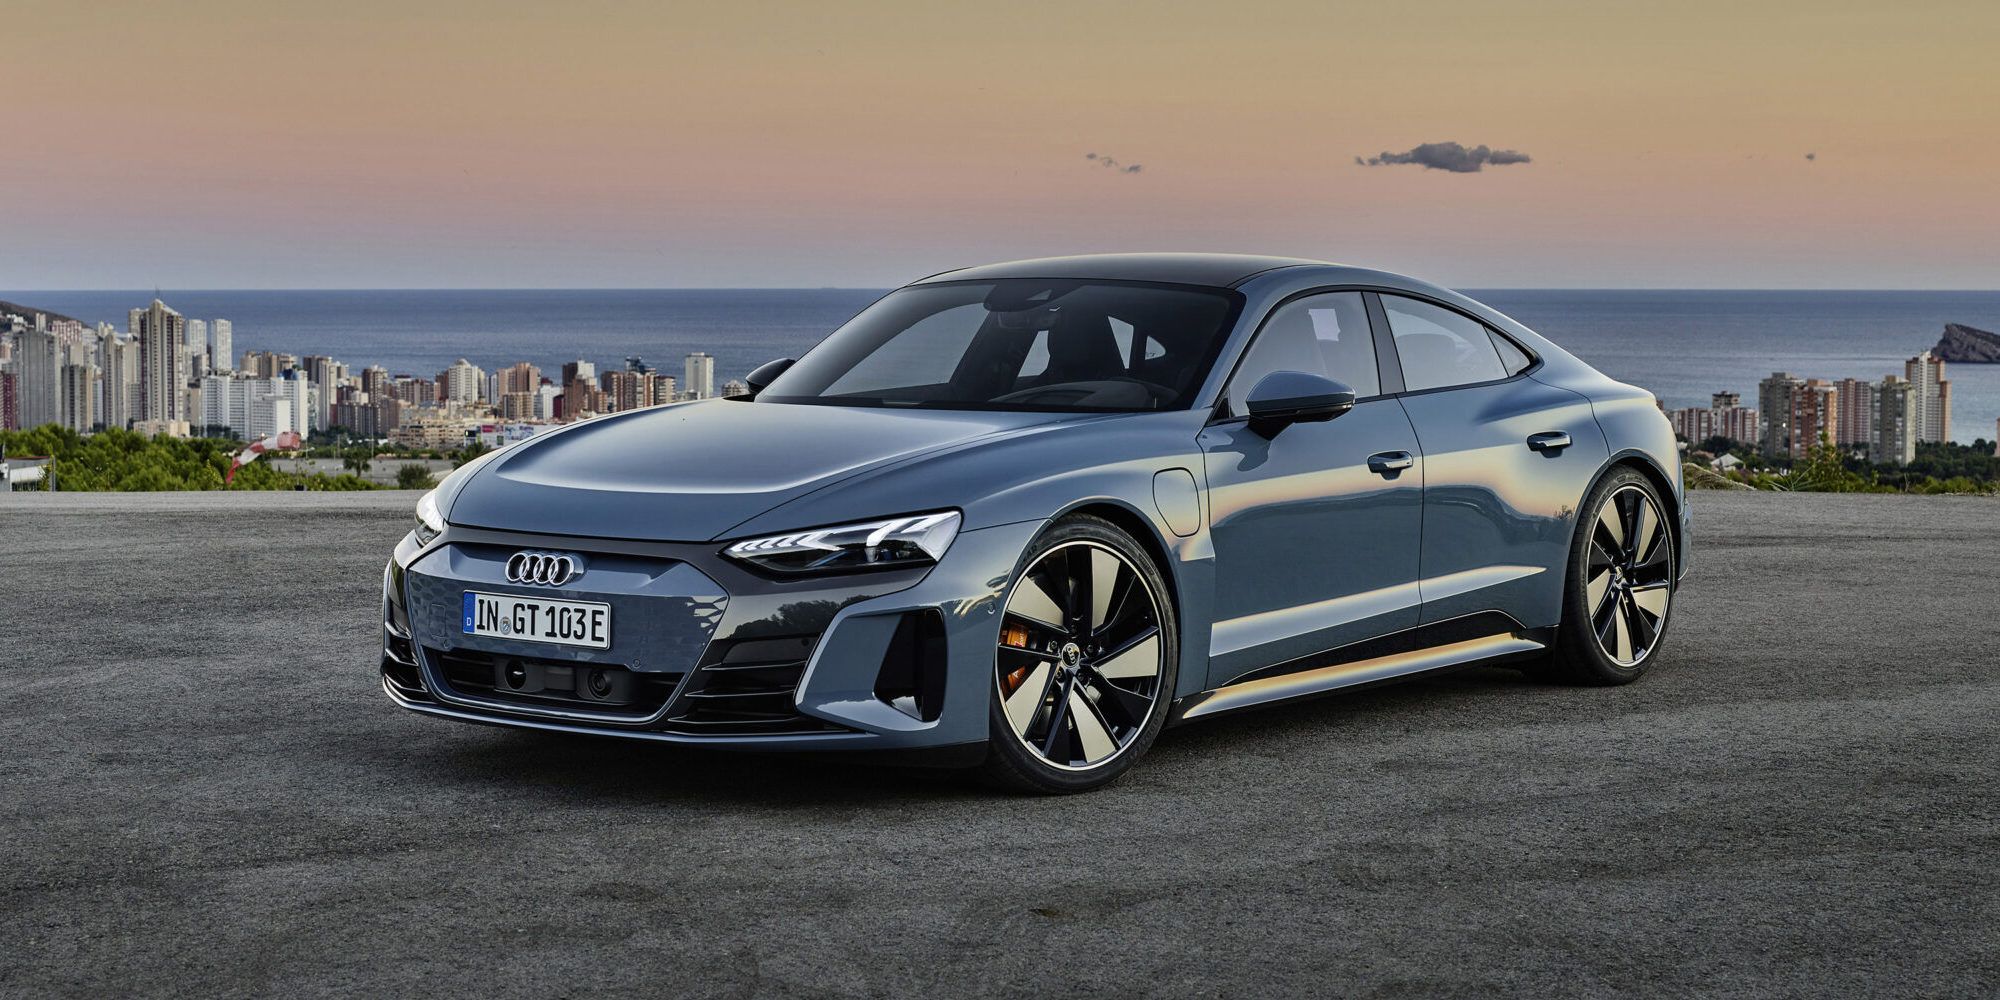 2022 Audi E Tron GT parked with city landscape in background